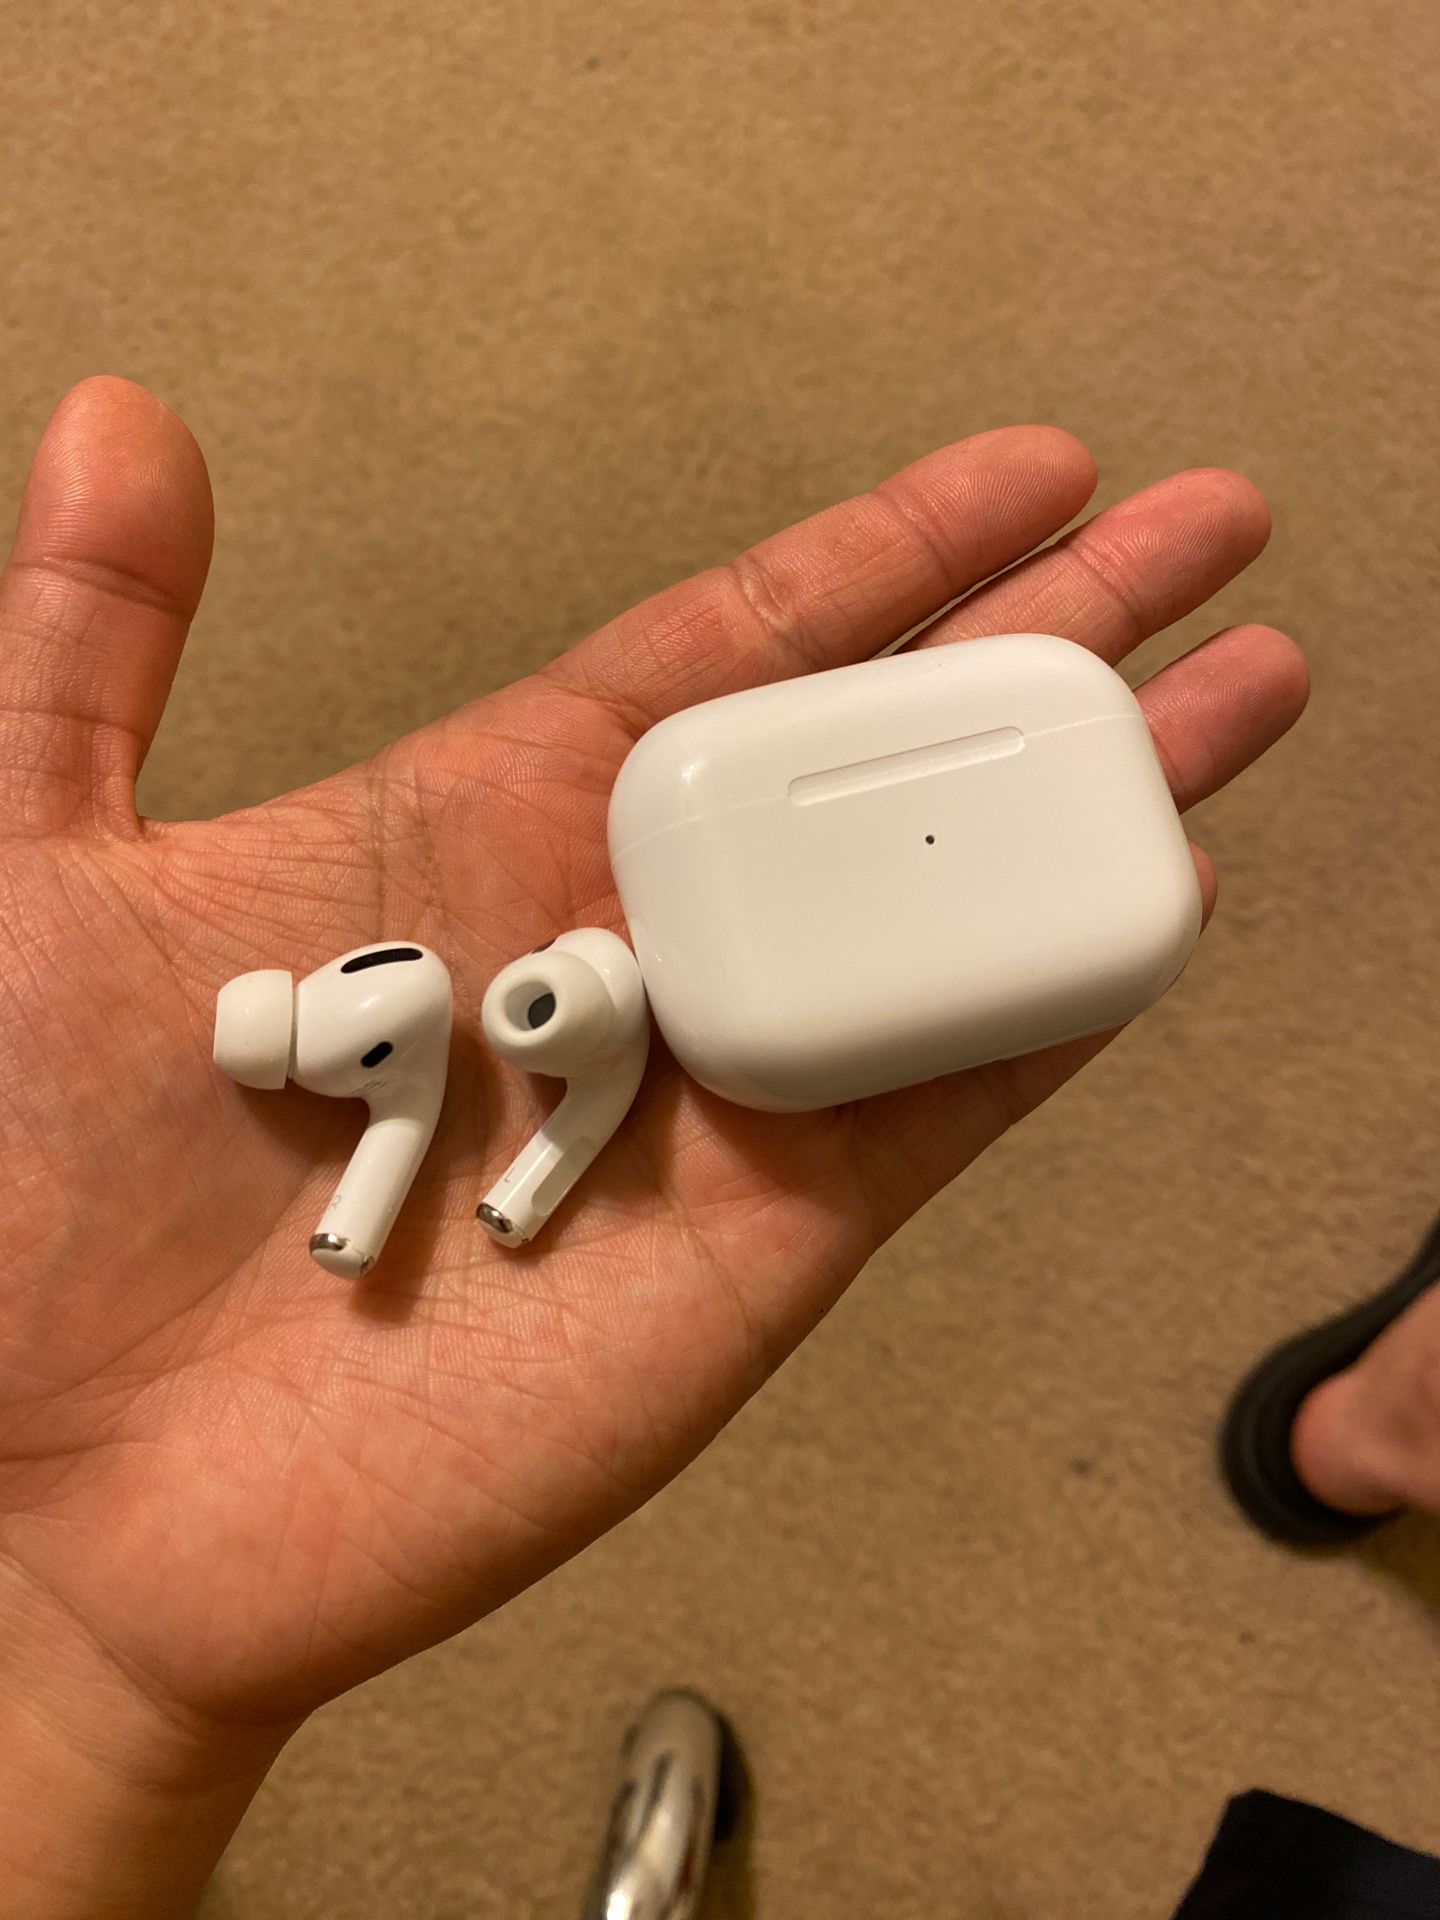 Generic AirPods Pro